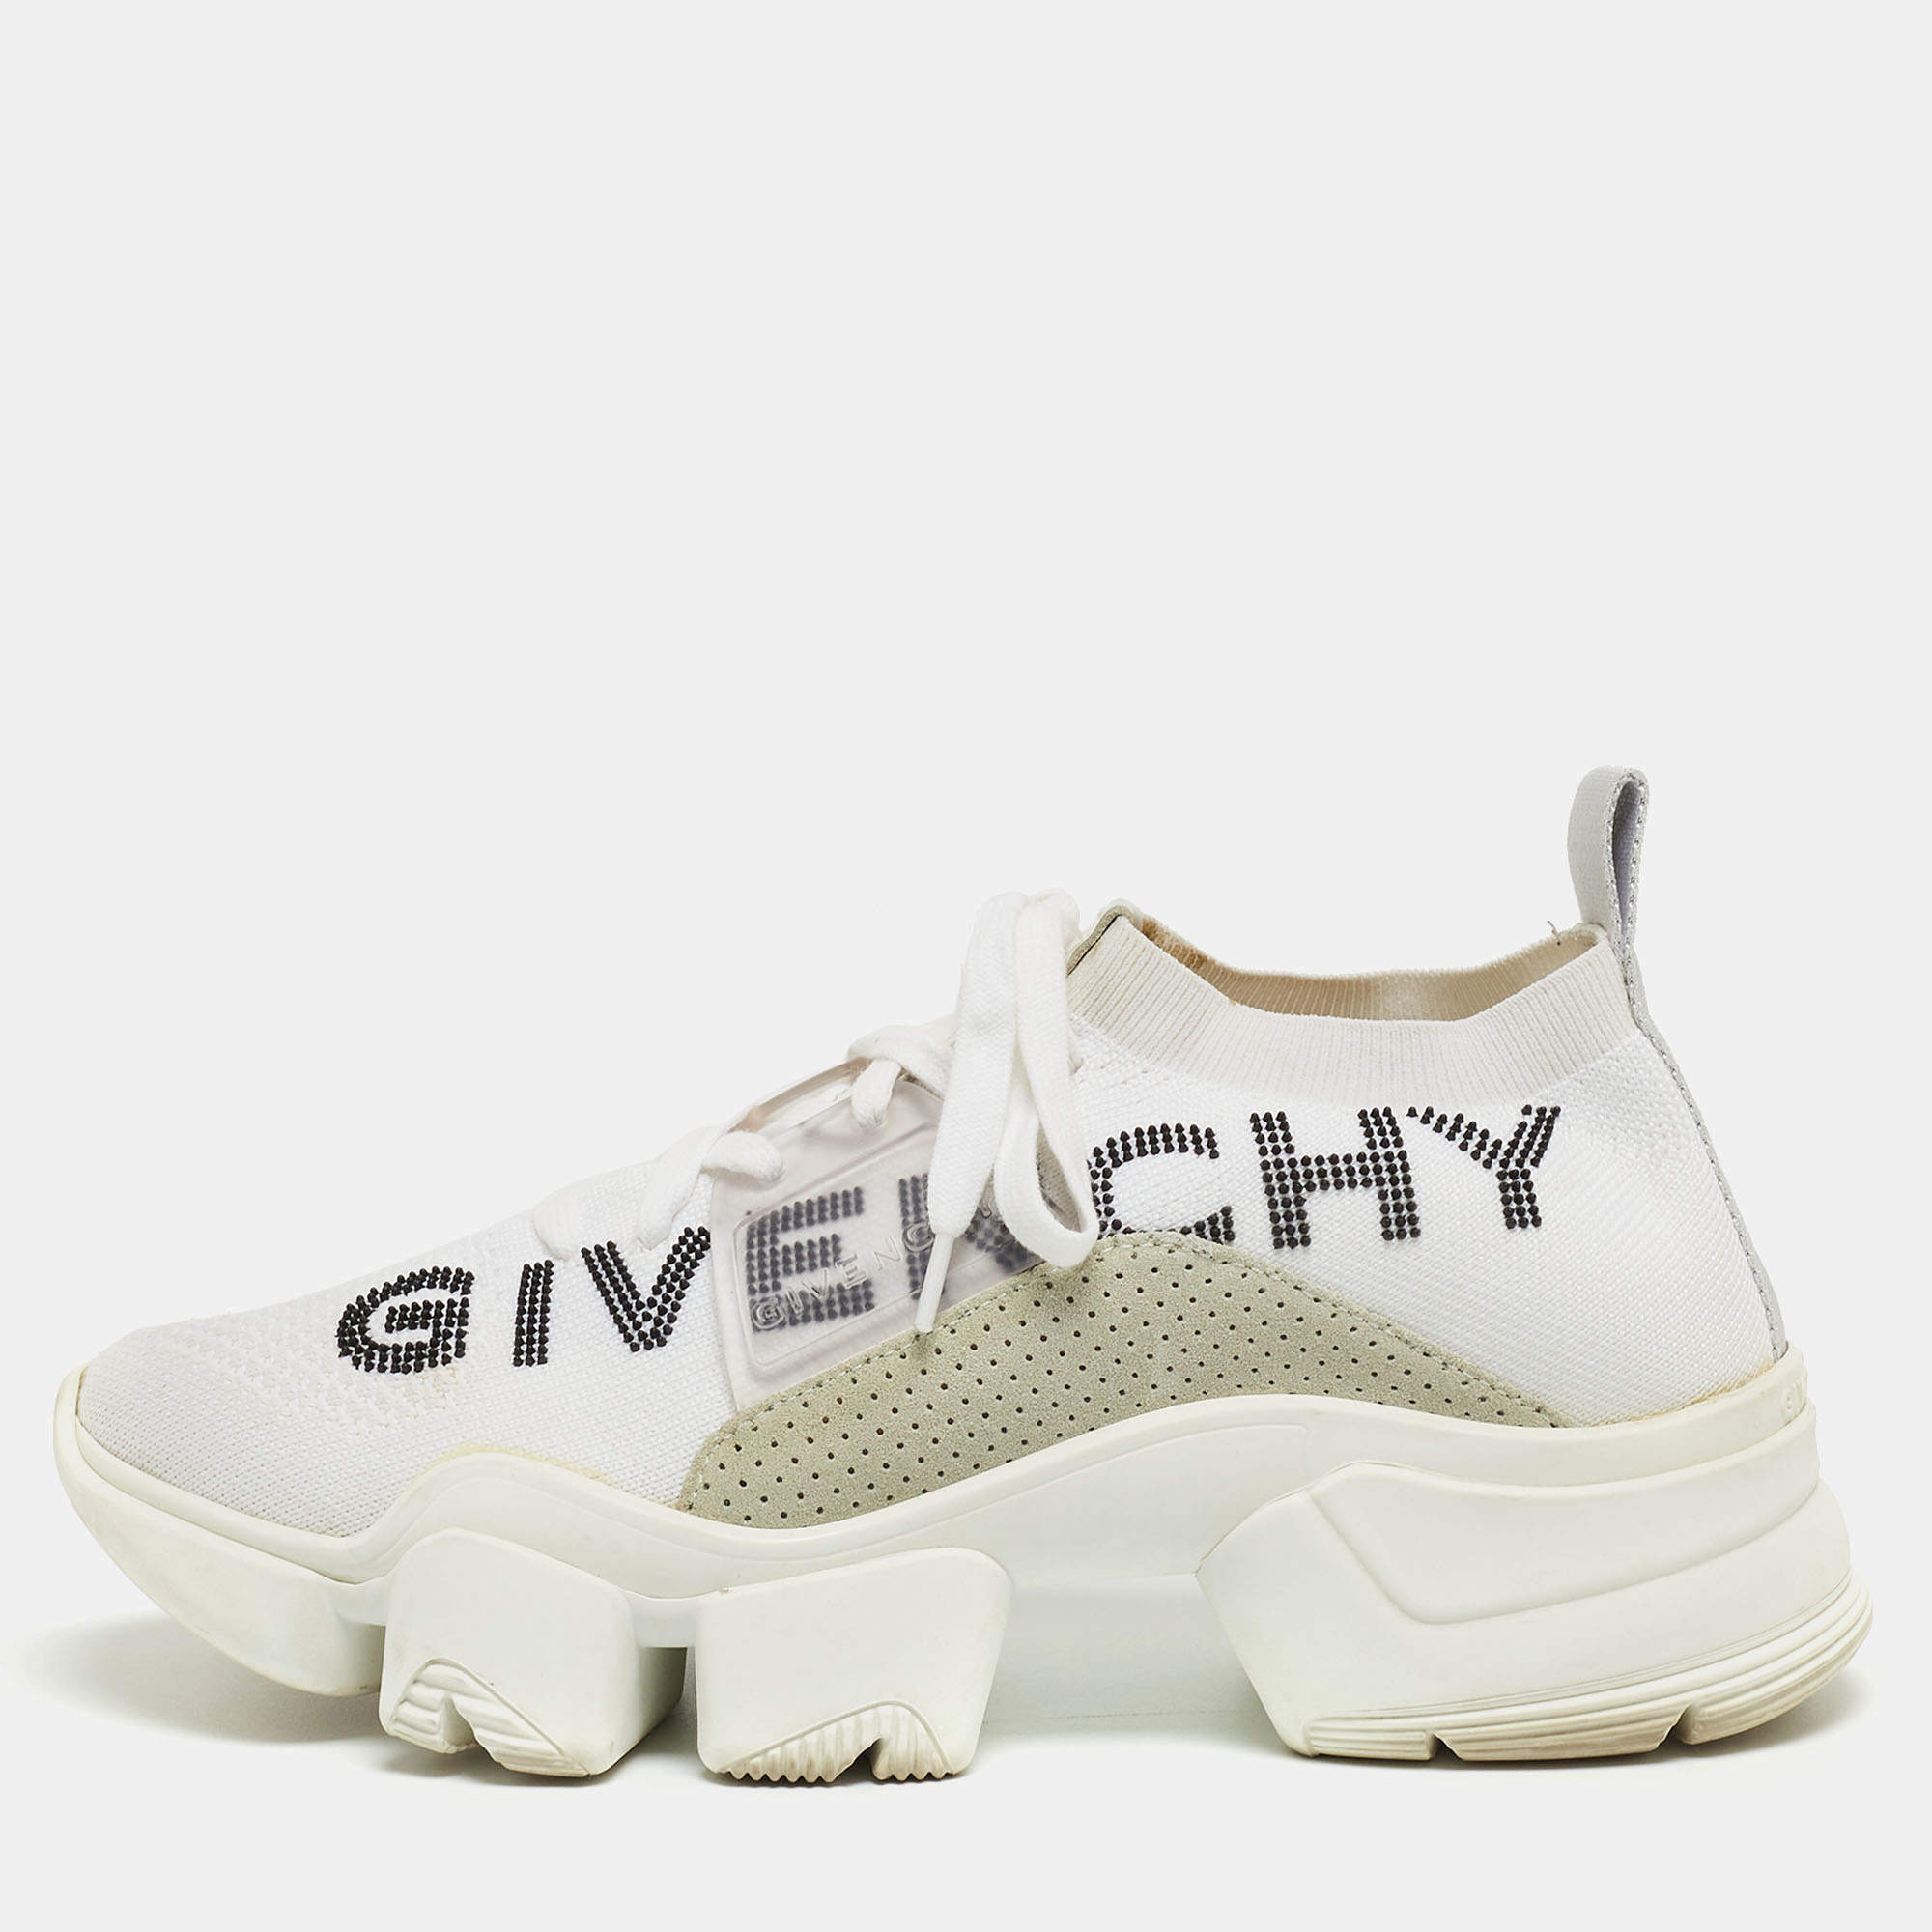 Givenchy White Knit Fabric Low Top Sneakers Size 40